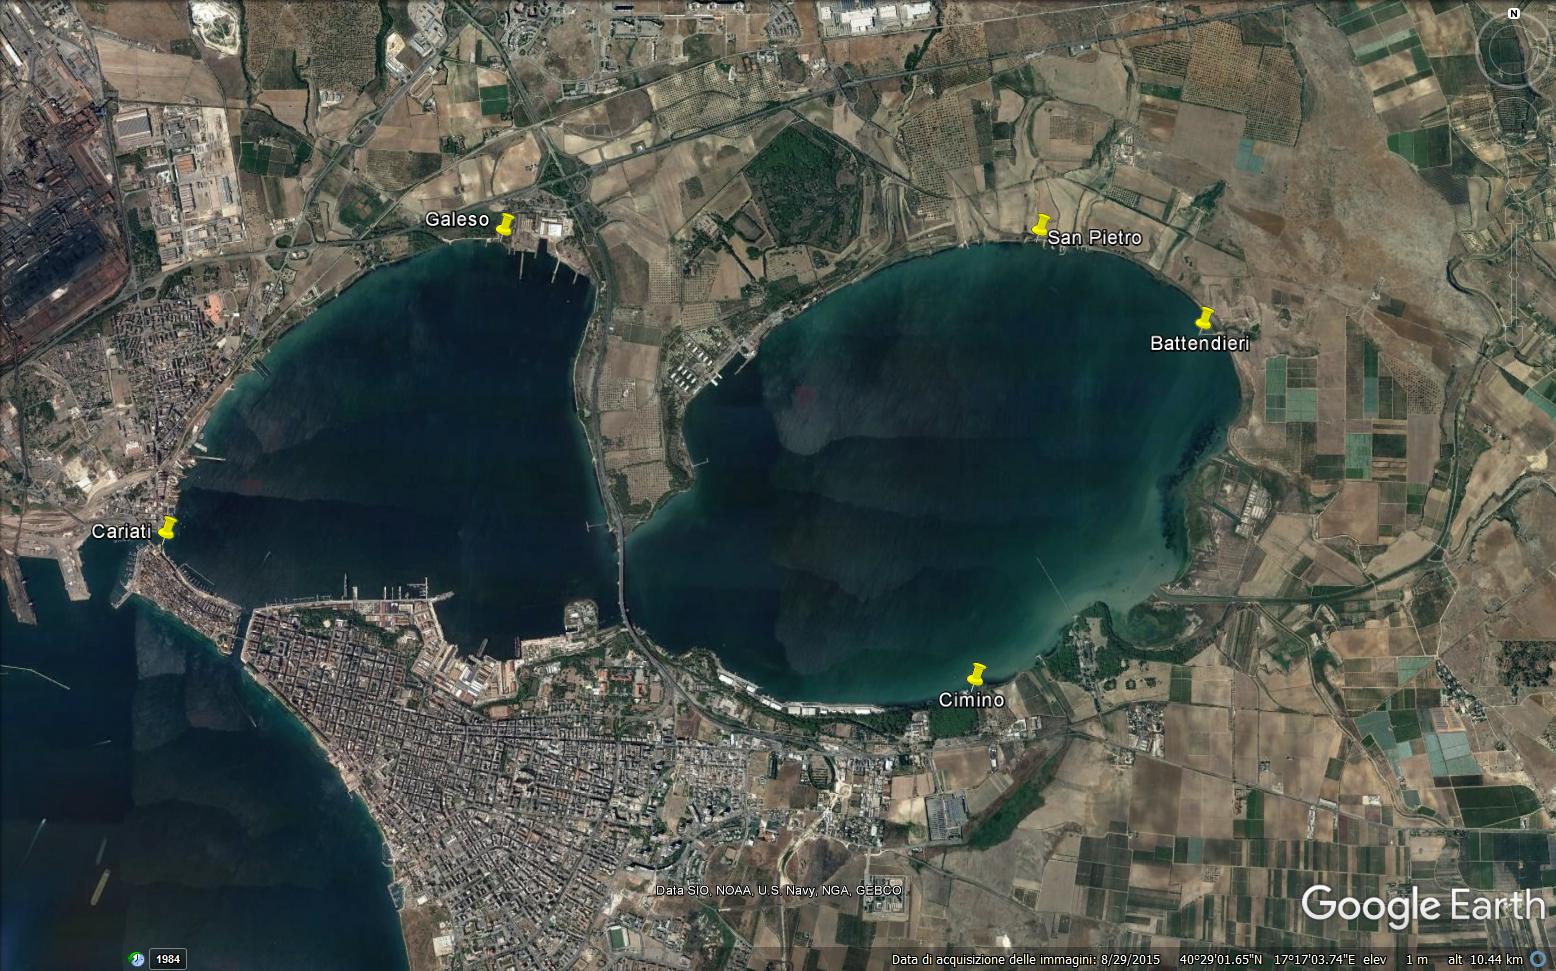 The Mar Piccolo of Taranto from the satellite, with indication of sampling stations